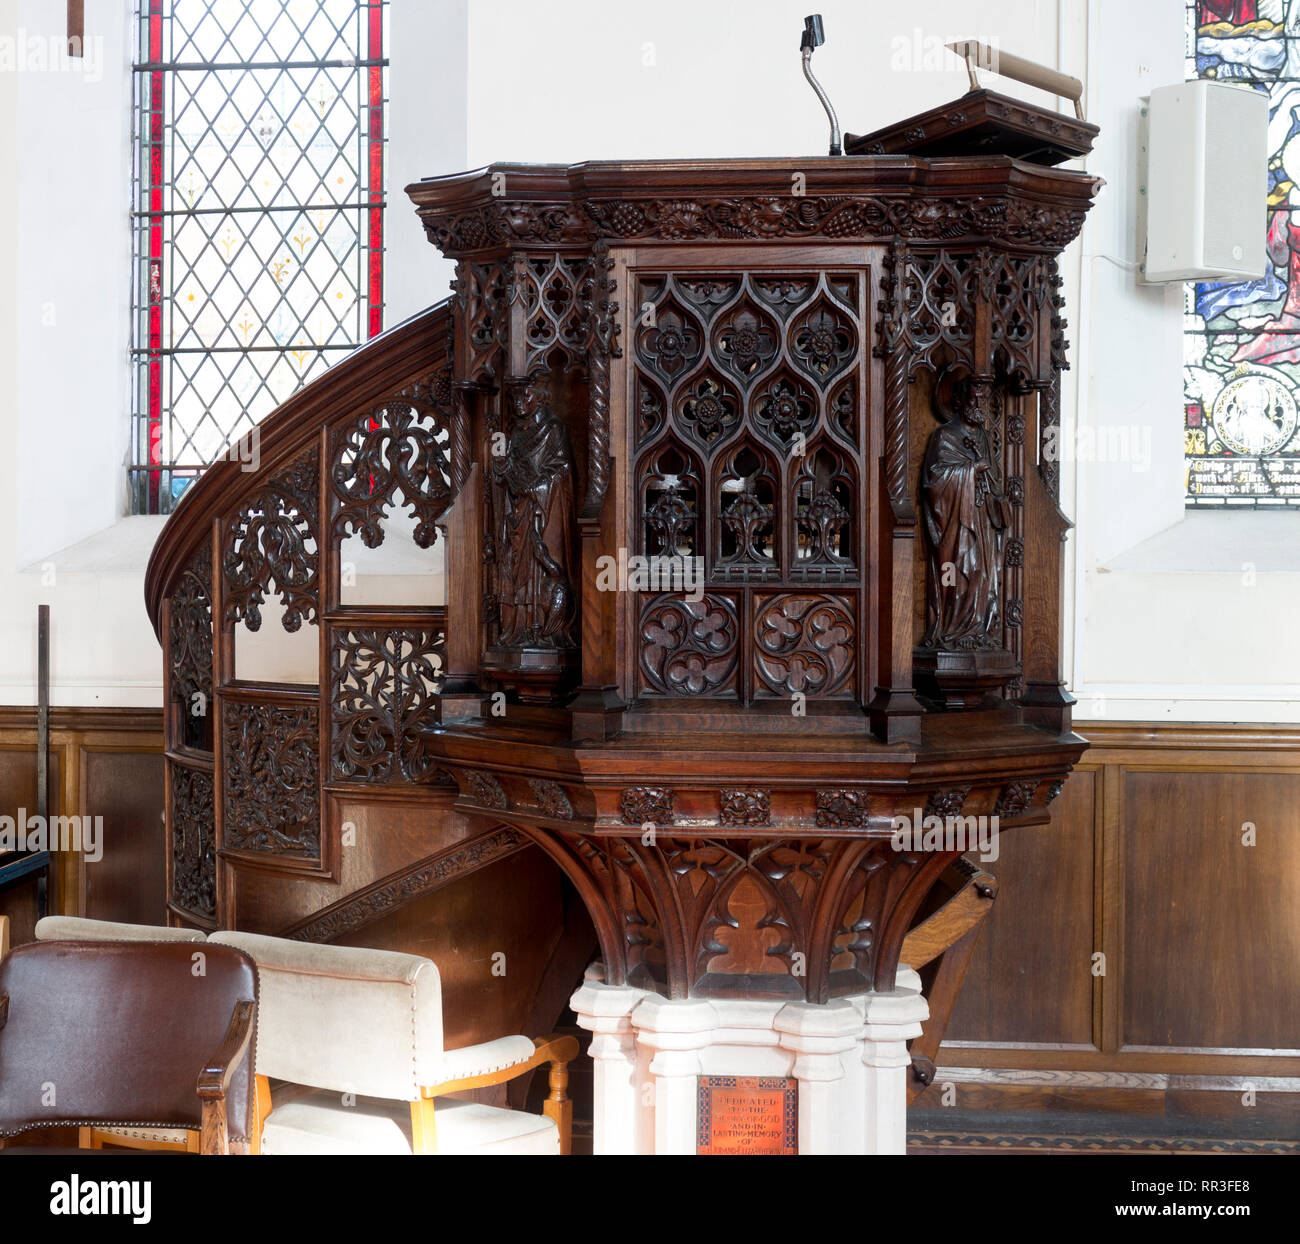 The wooden pulpit, St. Peter`s Church, Stafford Street, Walsall, West Midlands, England, UK Stock Photo